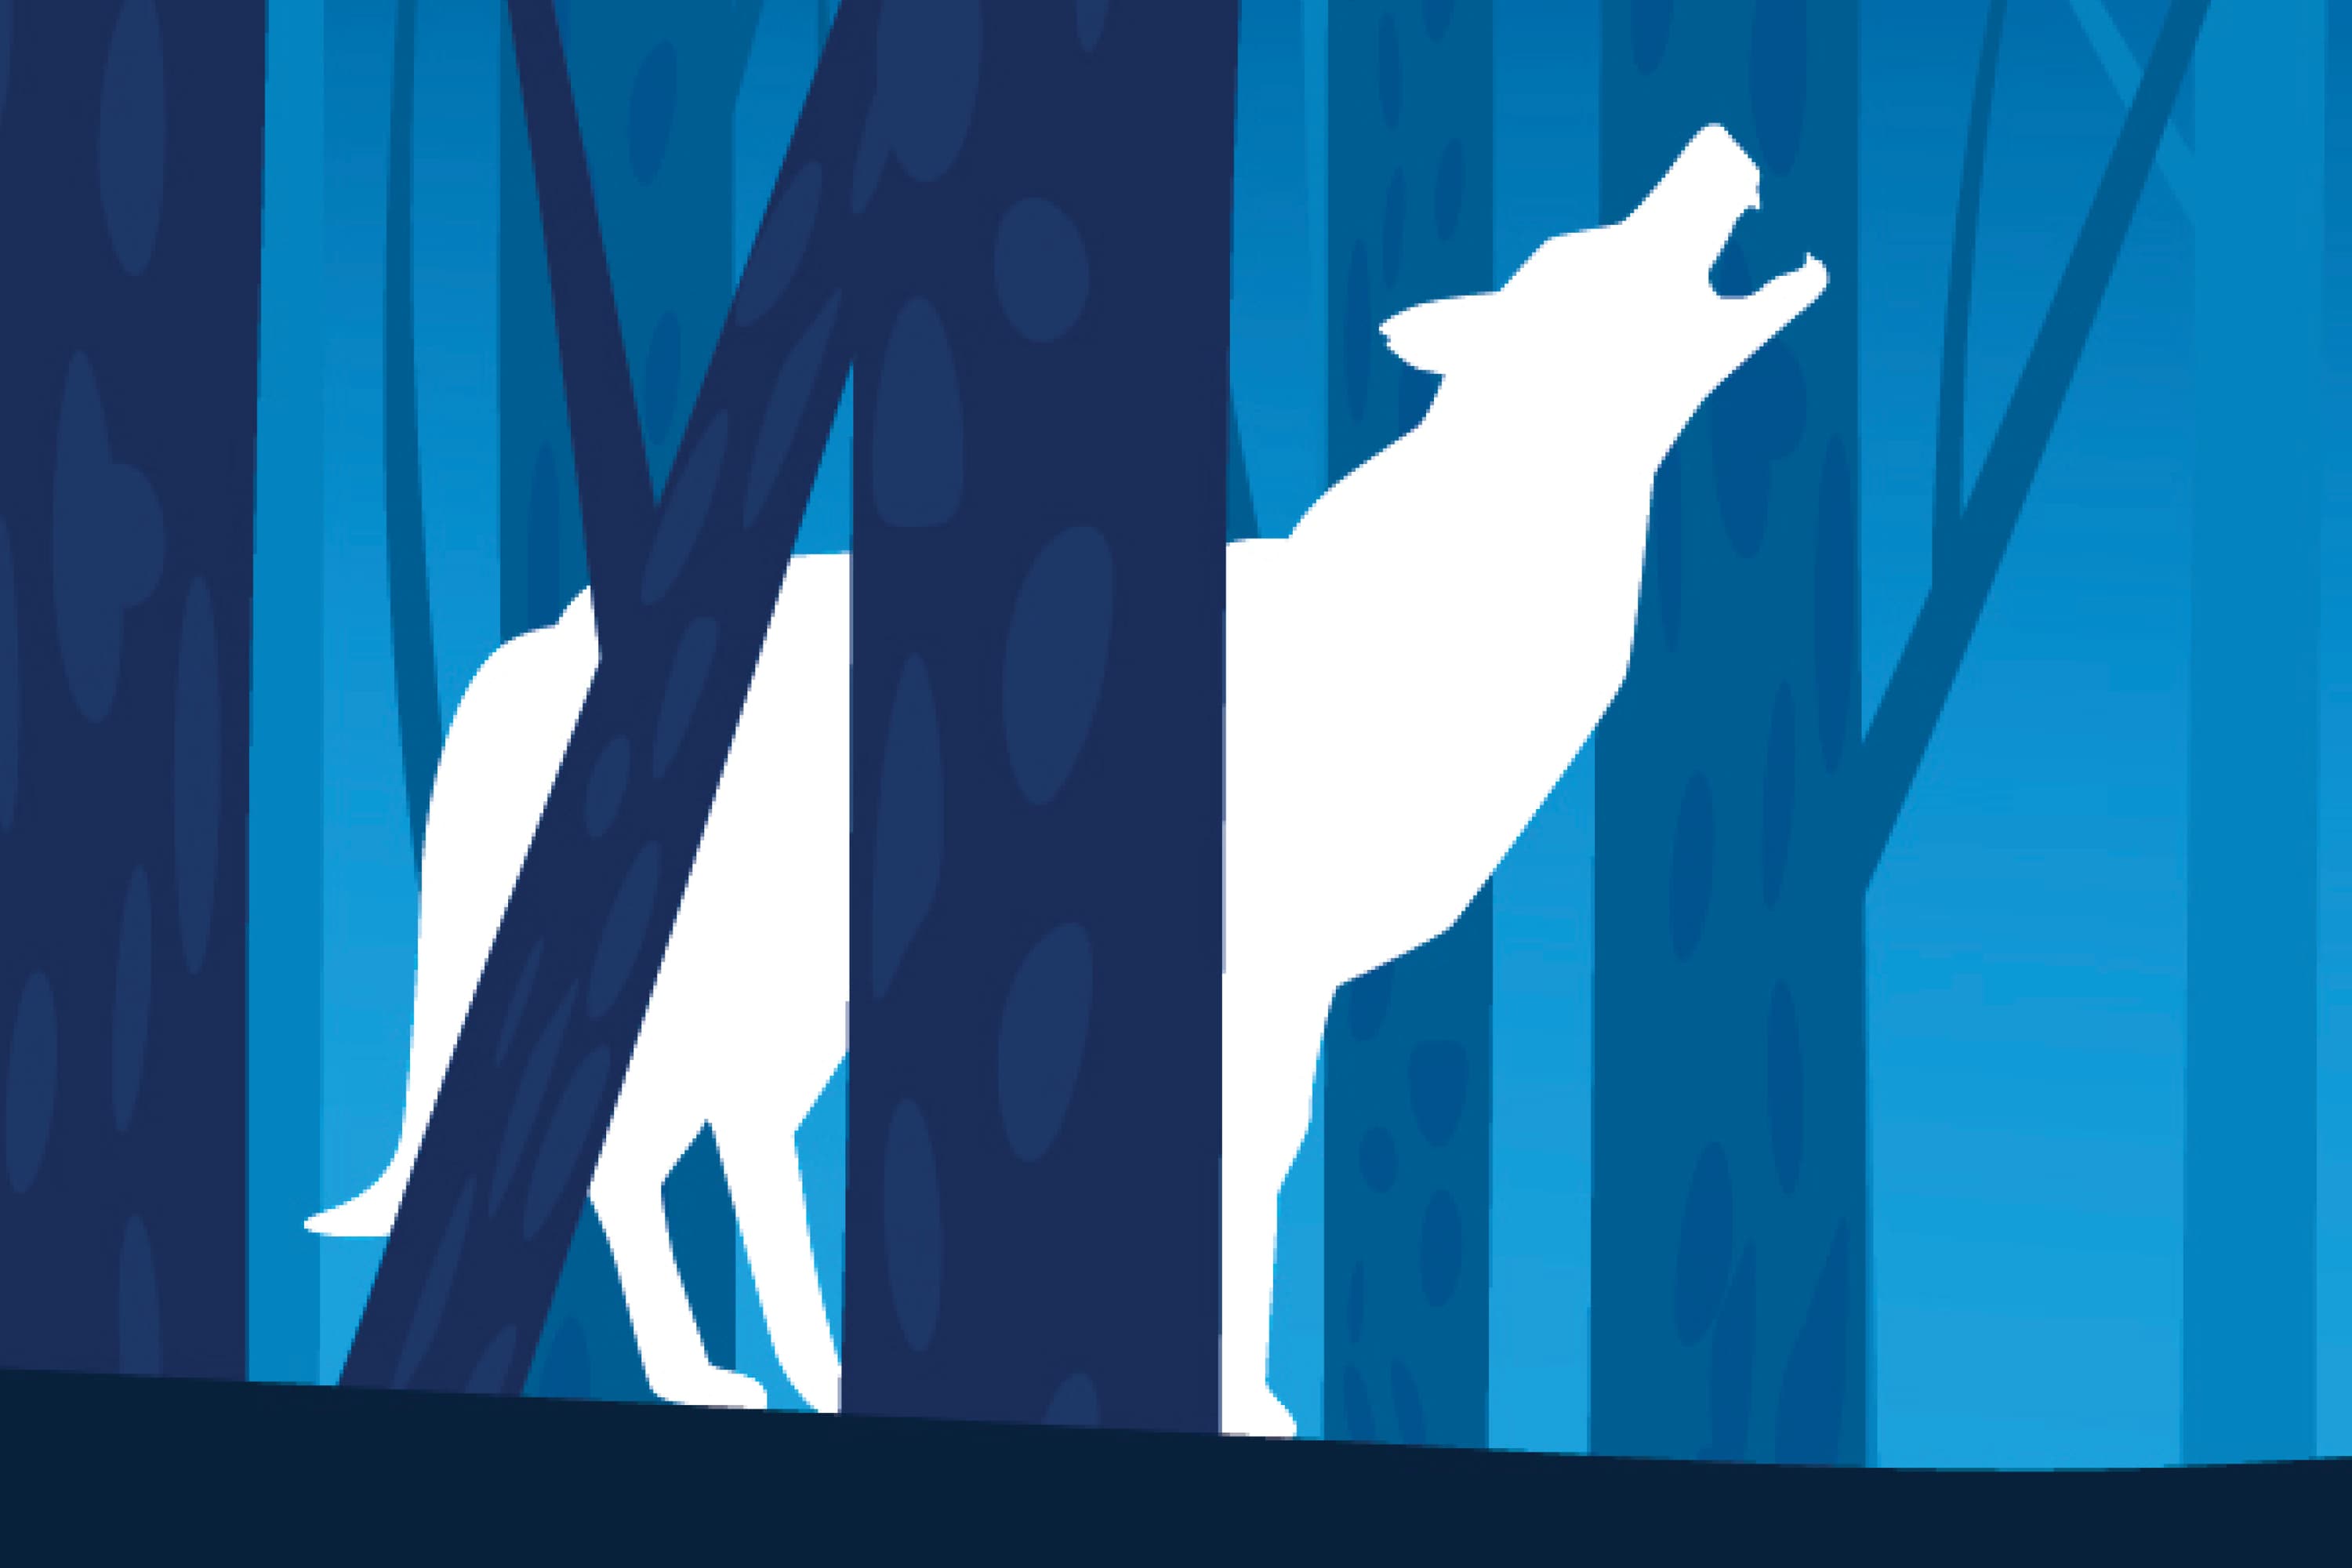 A wolf howls in the woods.